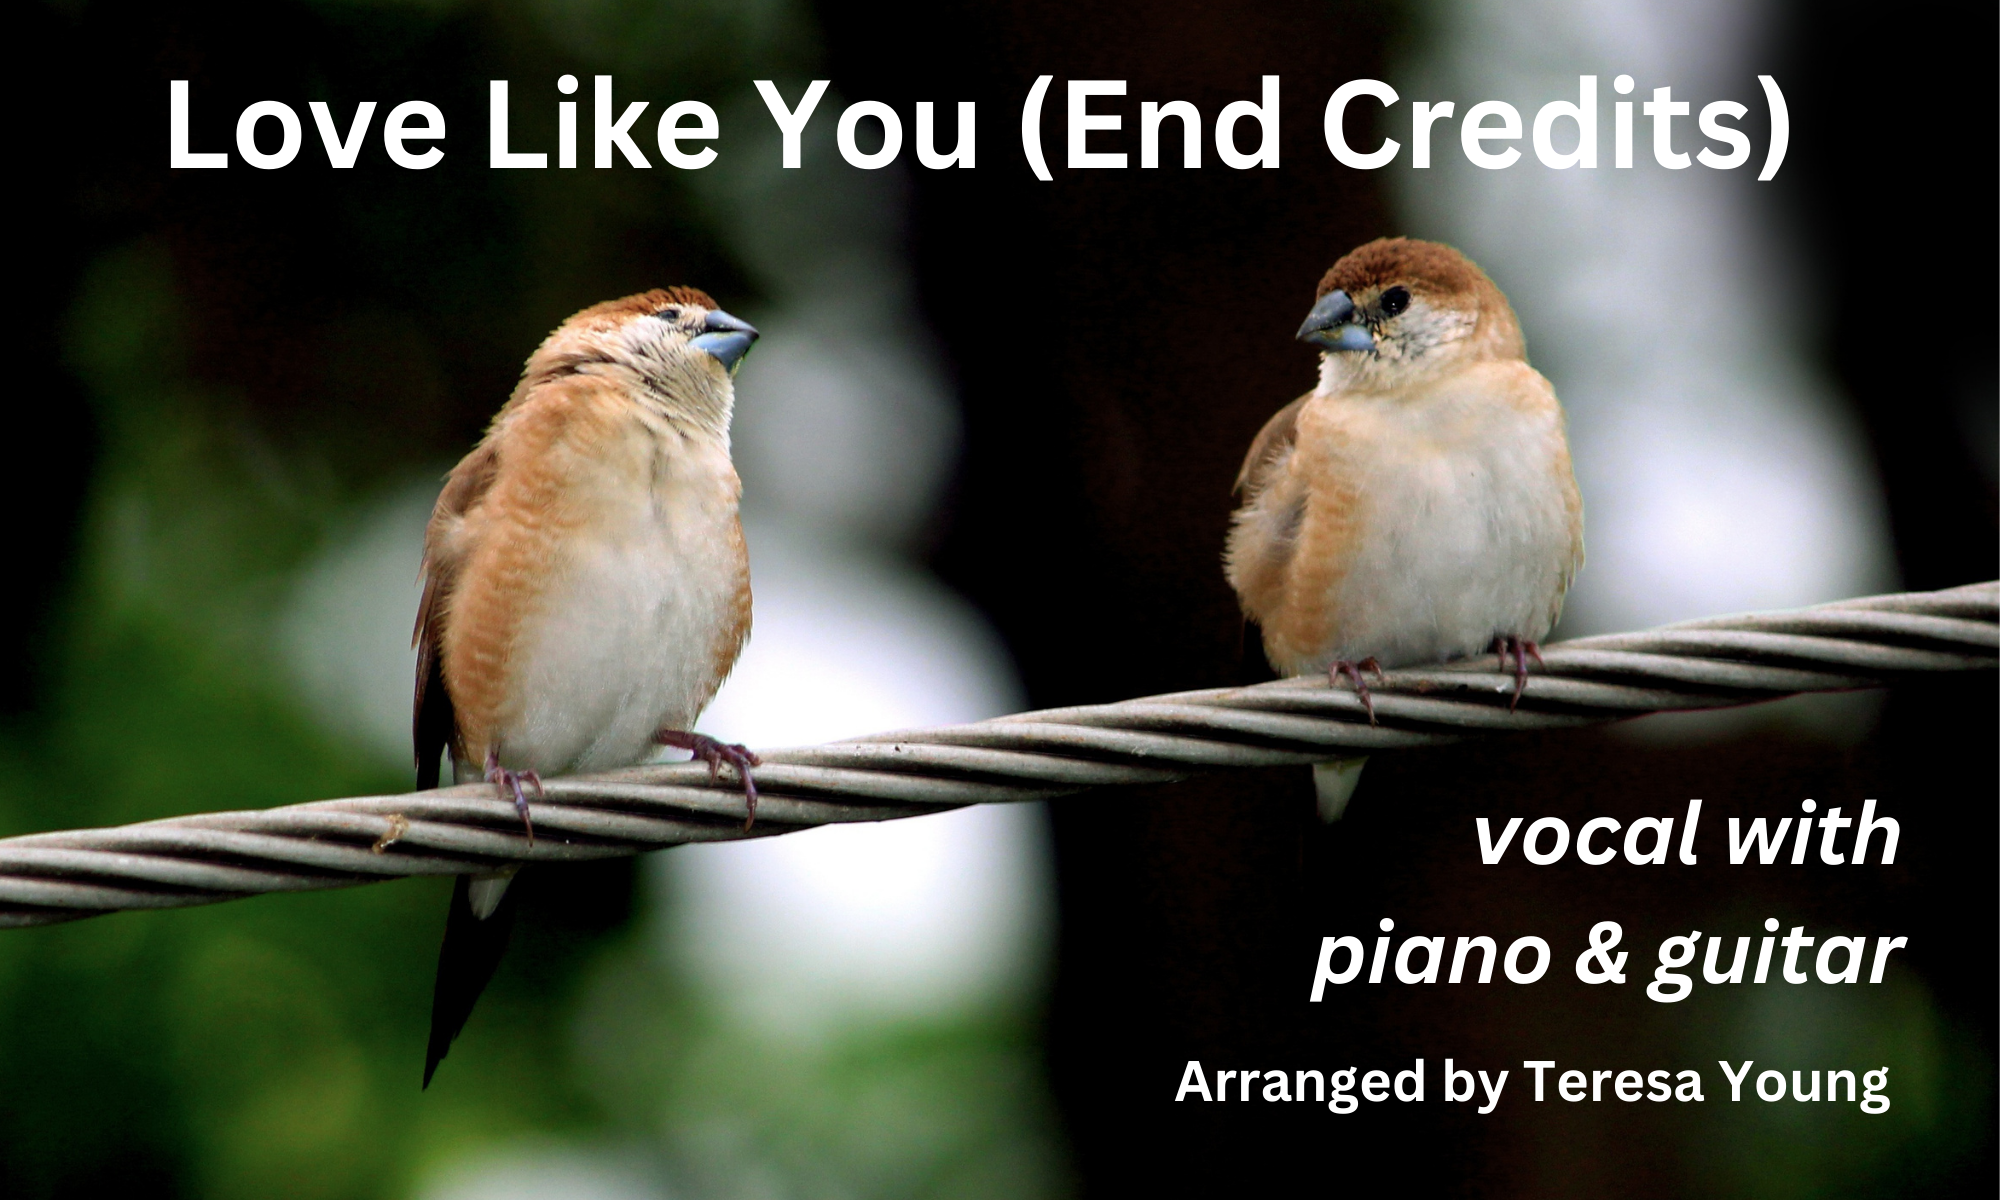 Love Like You, vocal with piano & guitar, arranged by Teresa Young